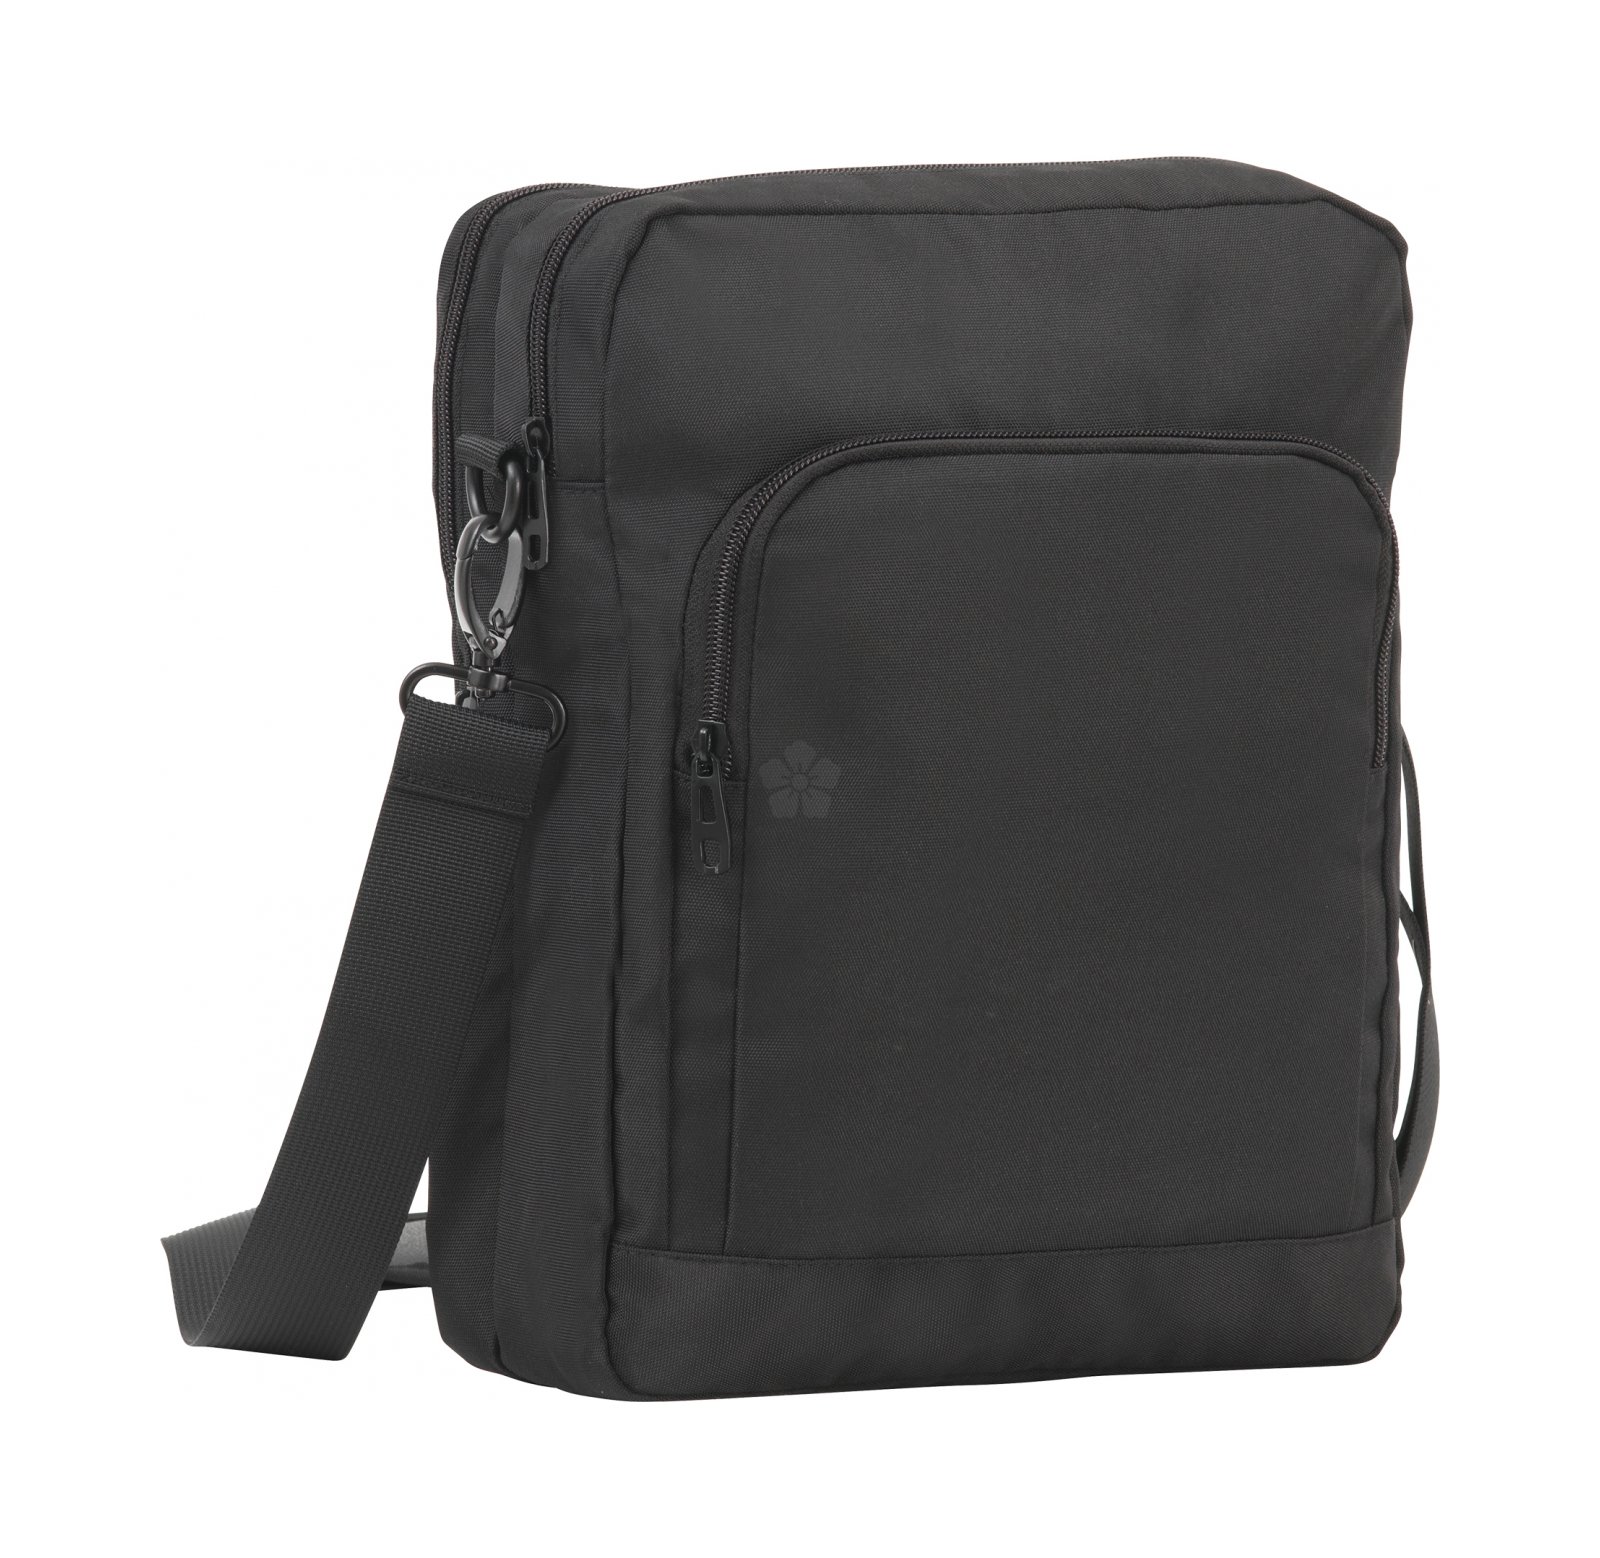 DefenderACE-B03 Tablet Shoulder Bag For 10.9-inch/12.9-inch iPad Air/P